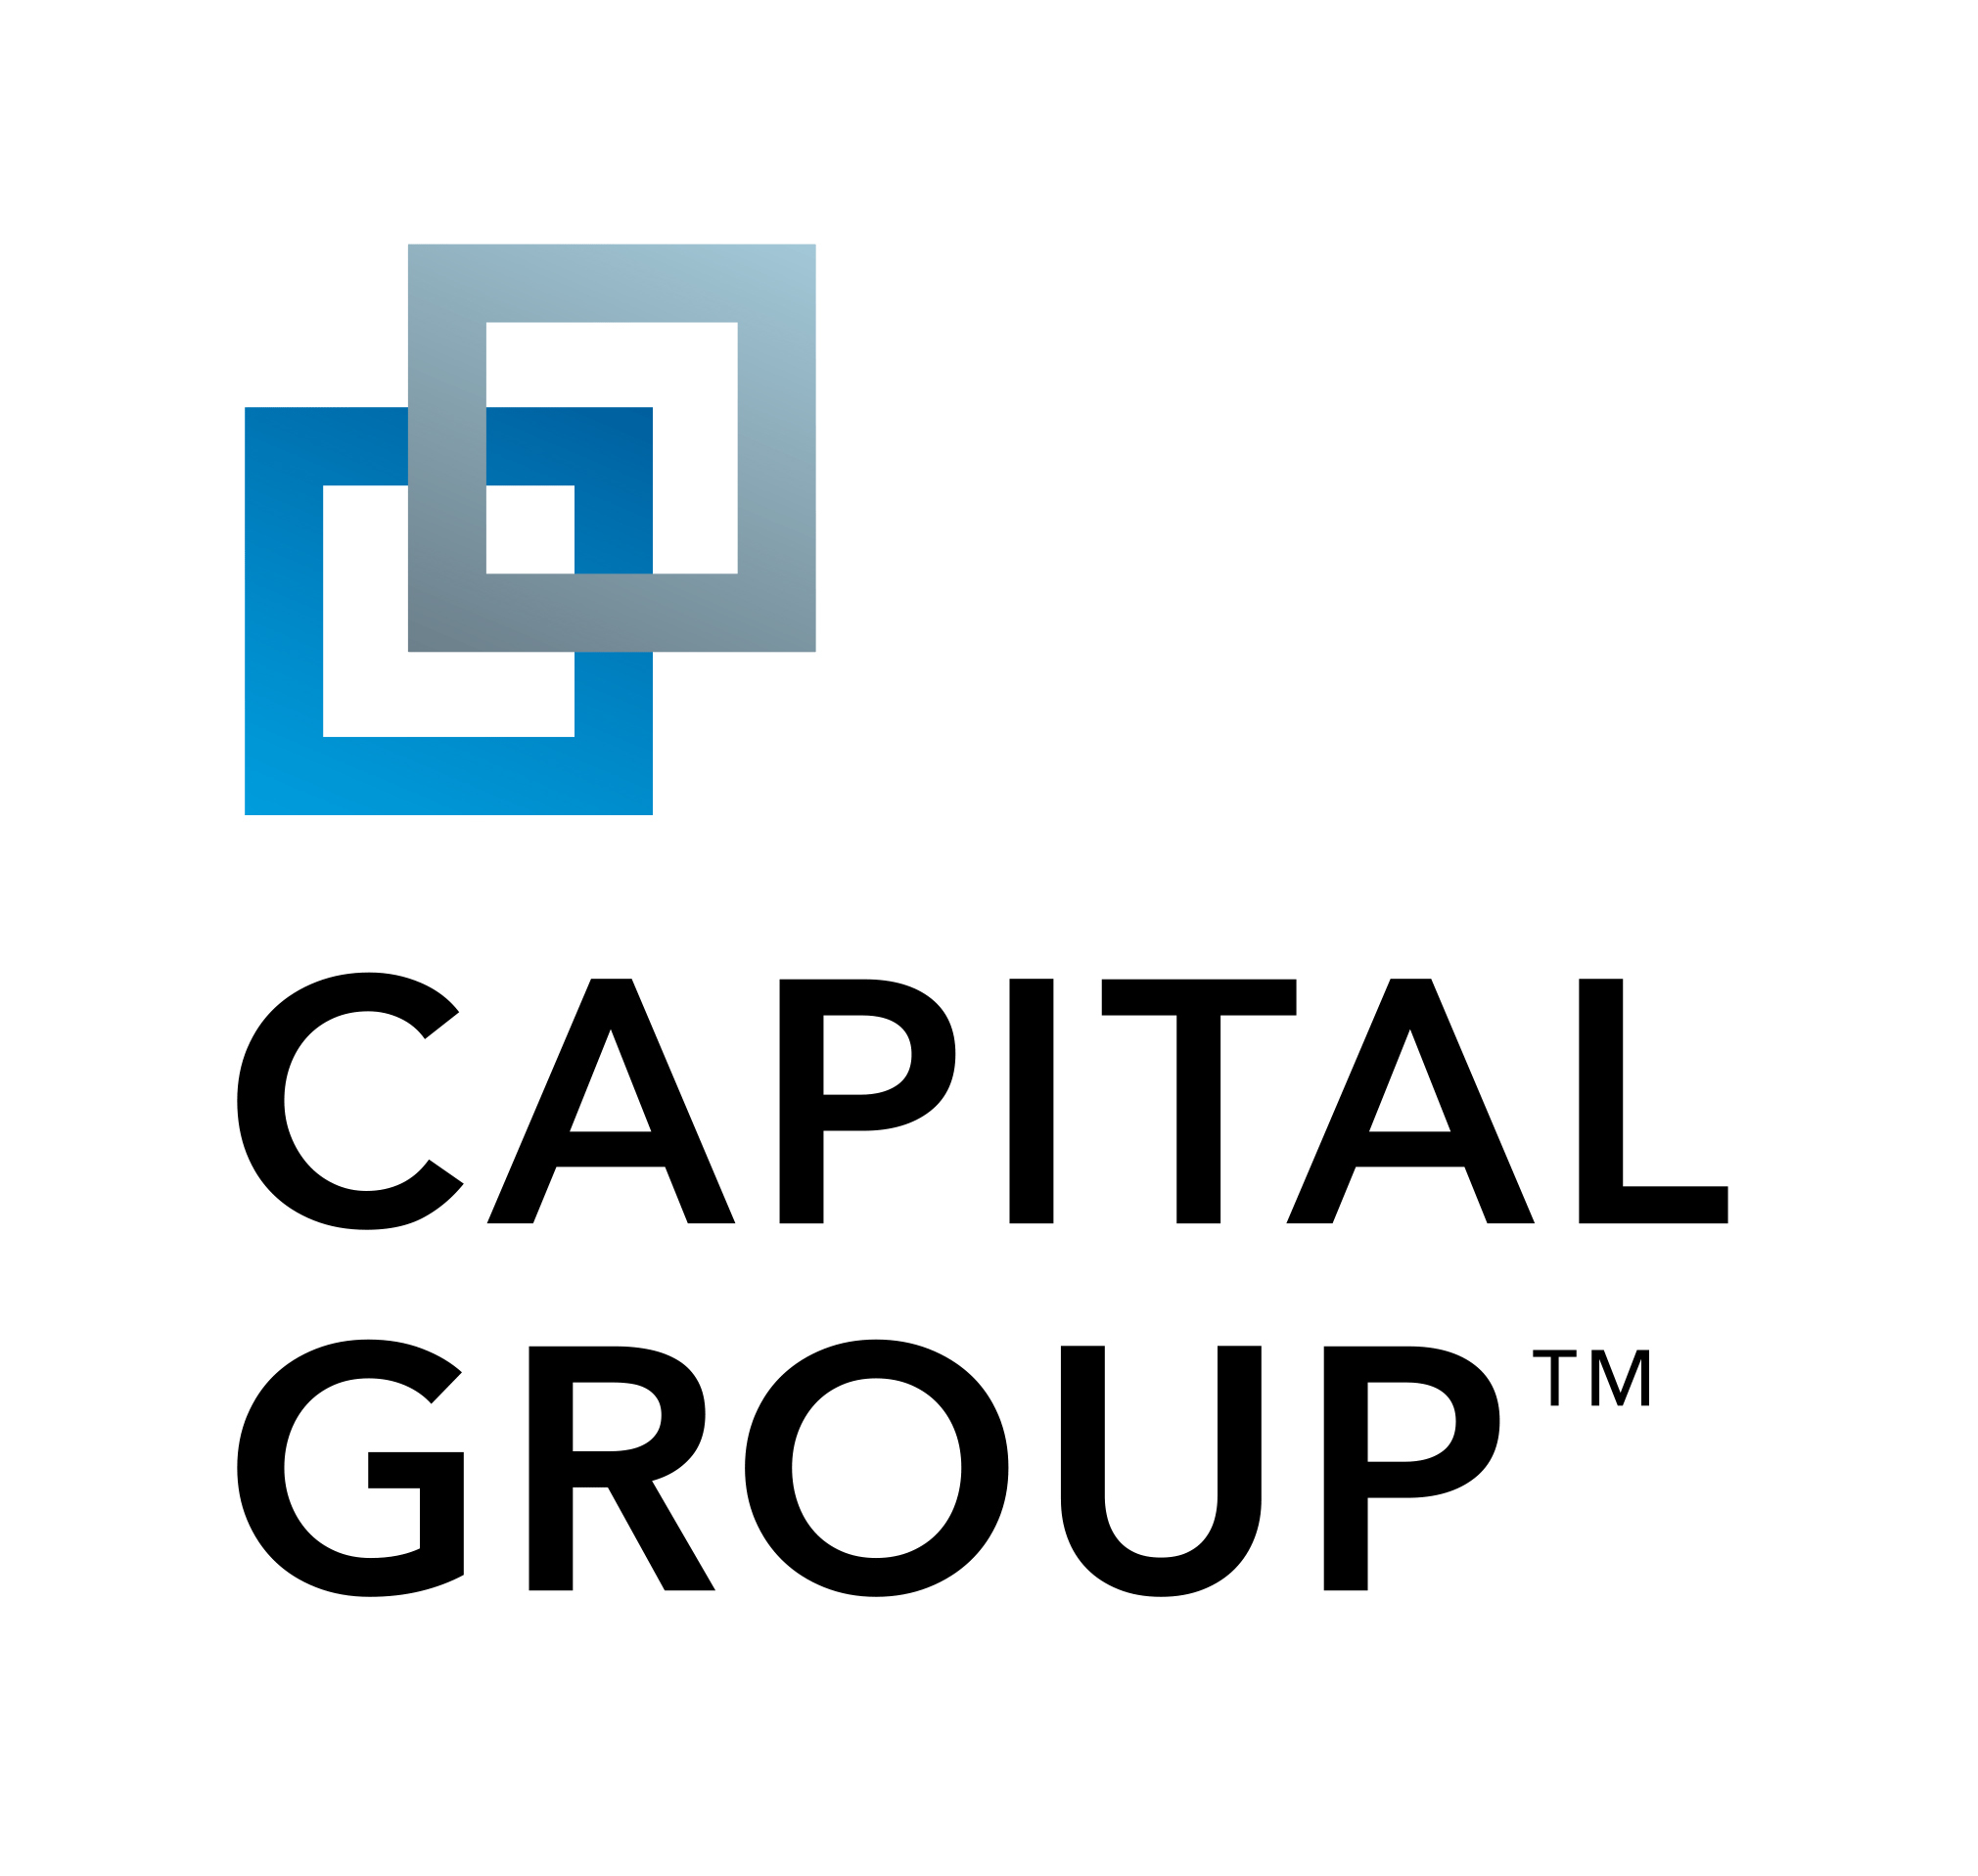 Capital Group Named A Best Place to Work by Glassdoor